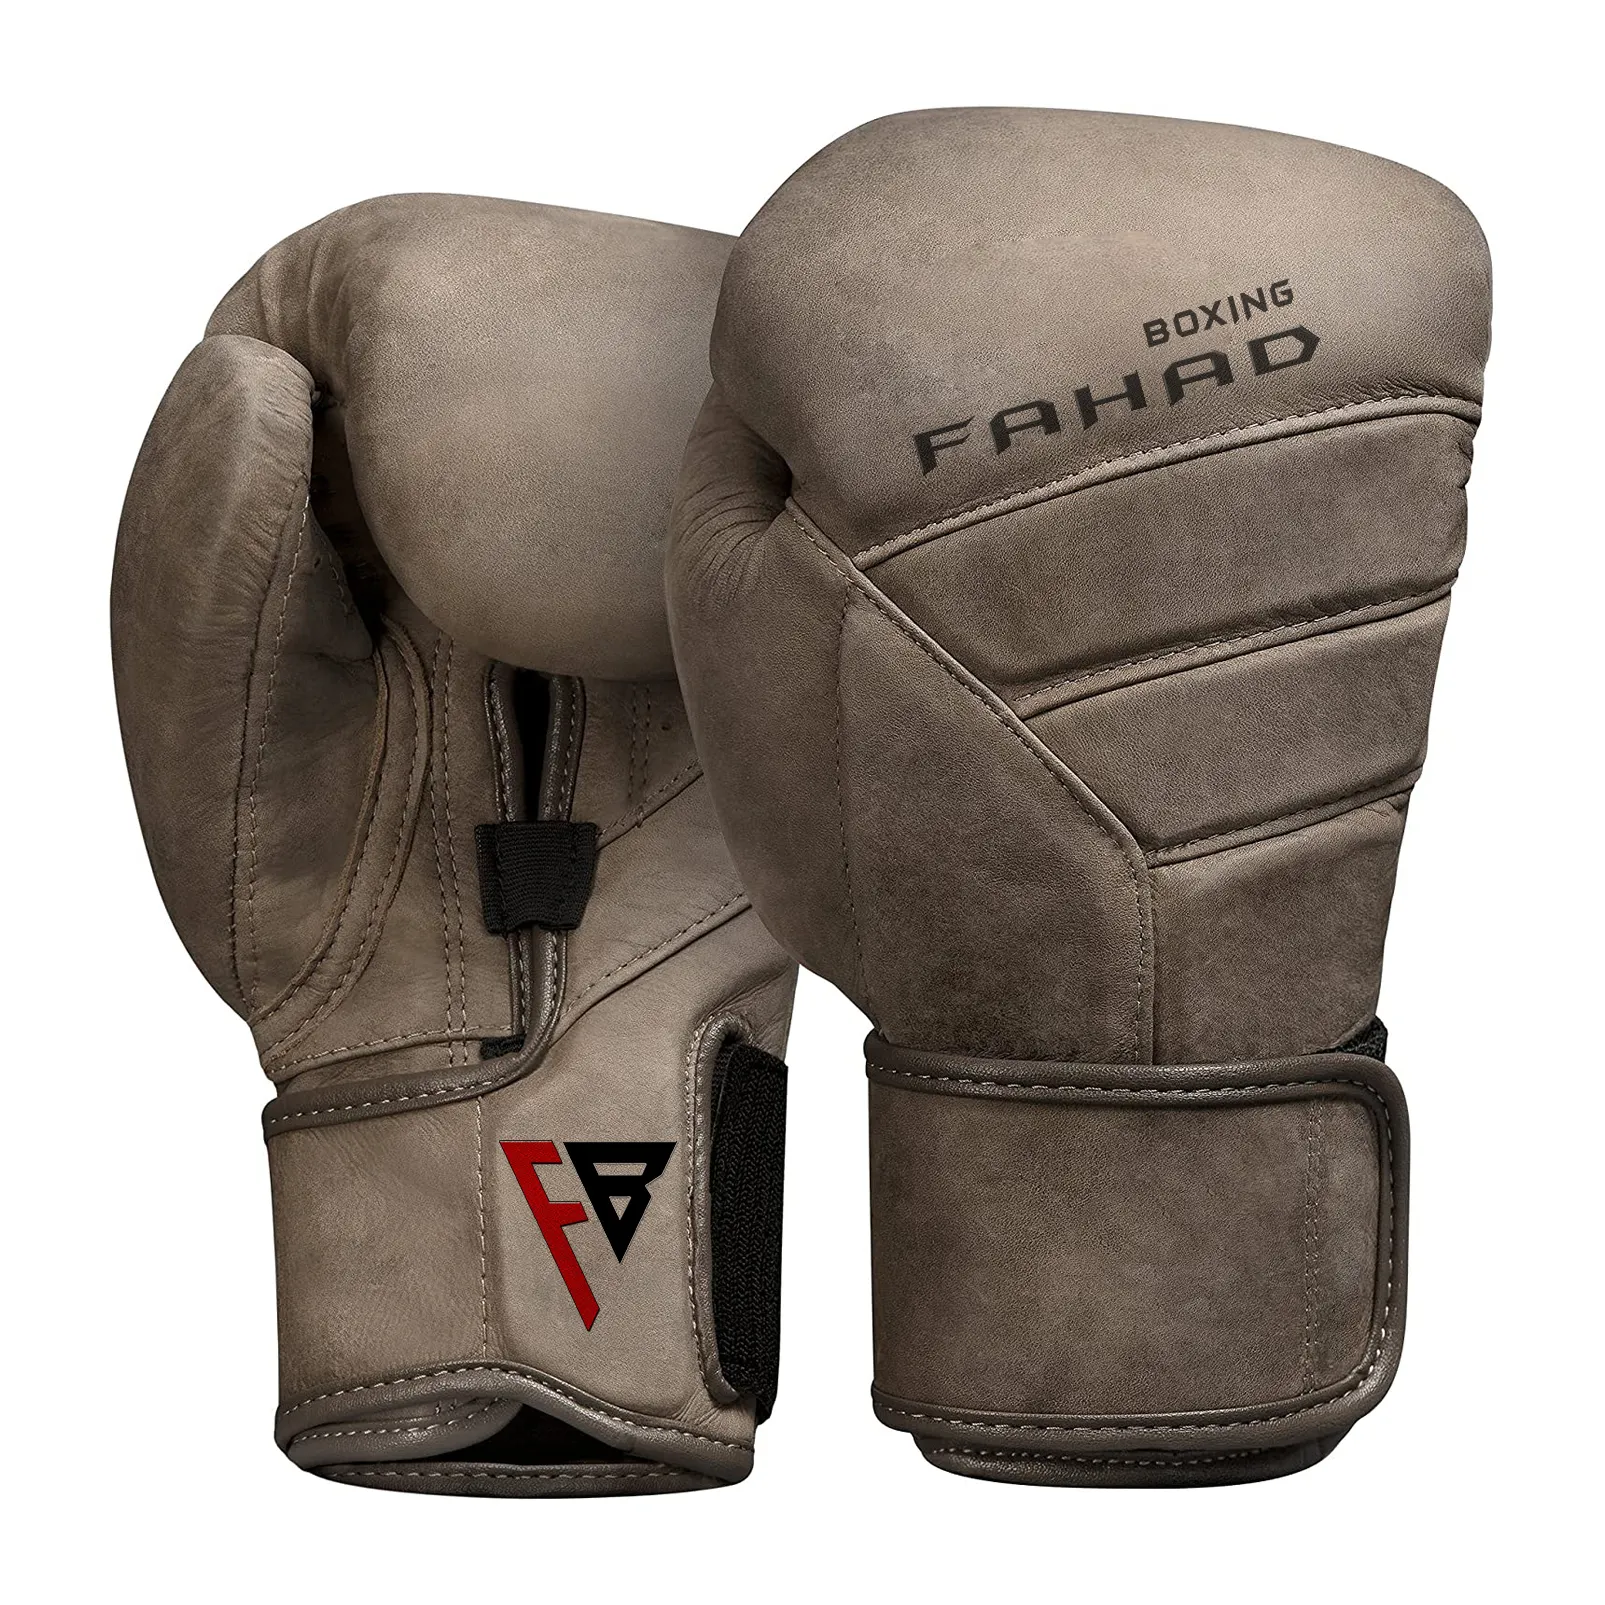 New Customized Boxing Gloves With High Quality Premium Leather / Best Boxing Gloves For Training /Fahad Boxing Gear